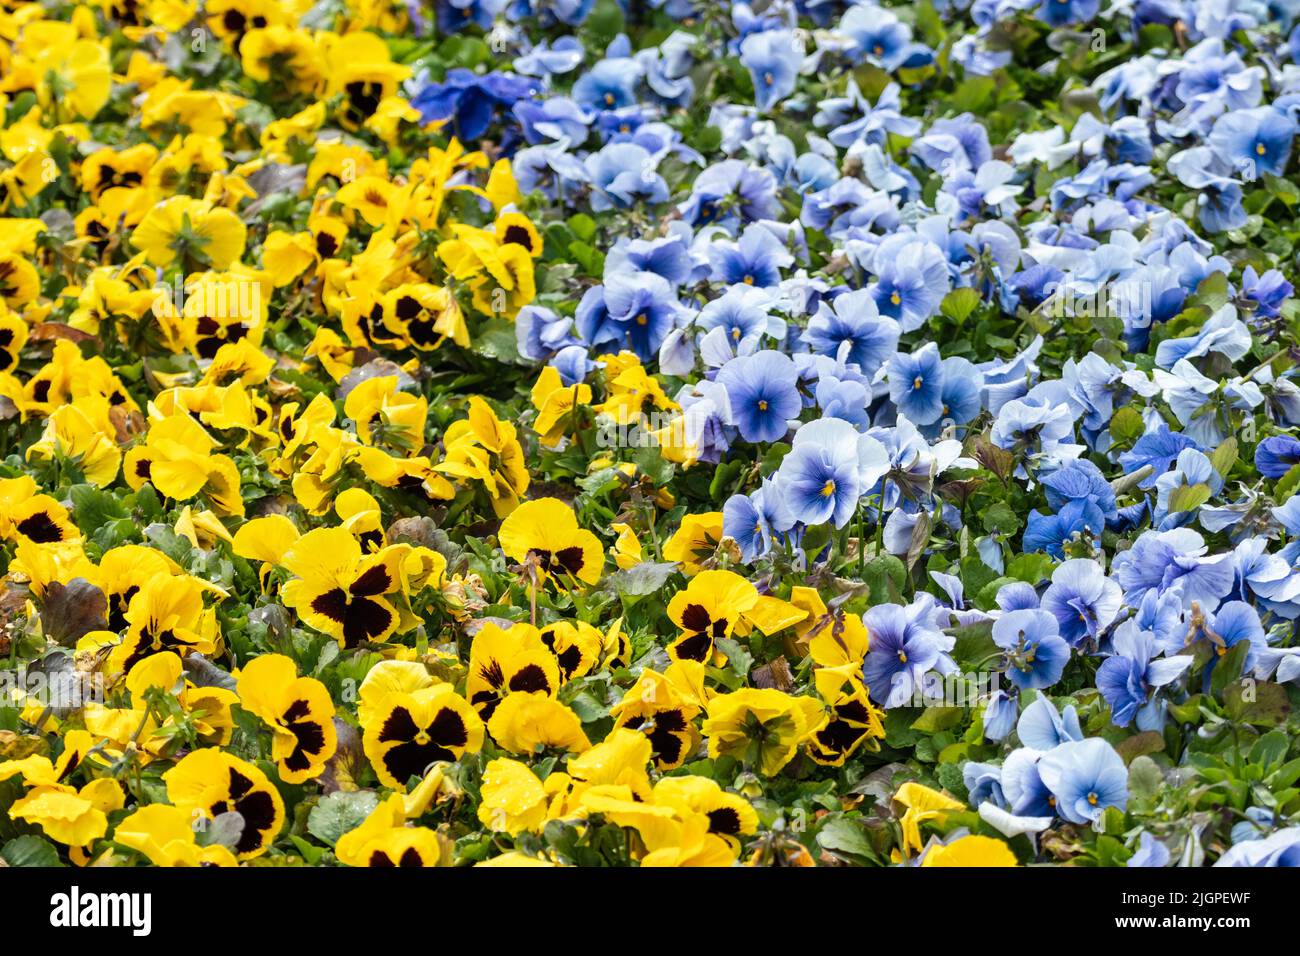 Vibrant yellow and blue Viola Cornuta pansies flowers close-up, floral background with blooming colorful heartsease pansy flowers with green leaves Stock Photo